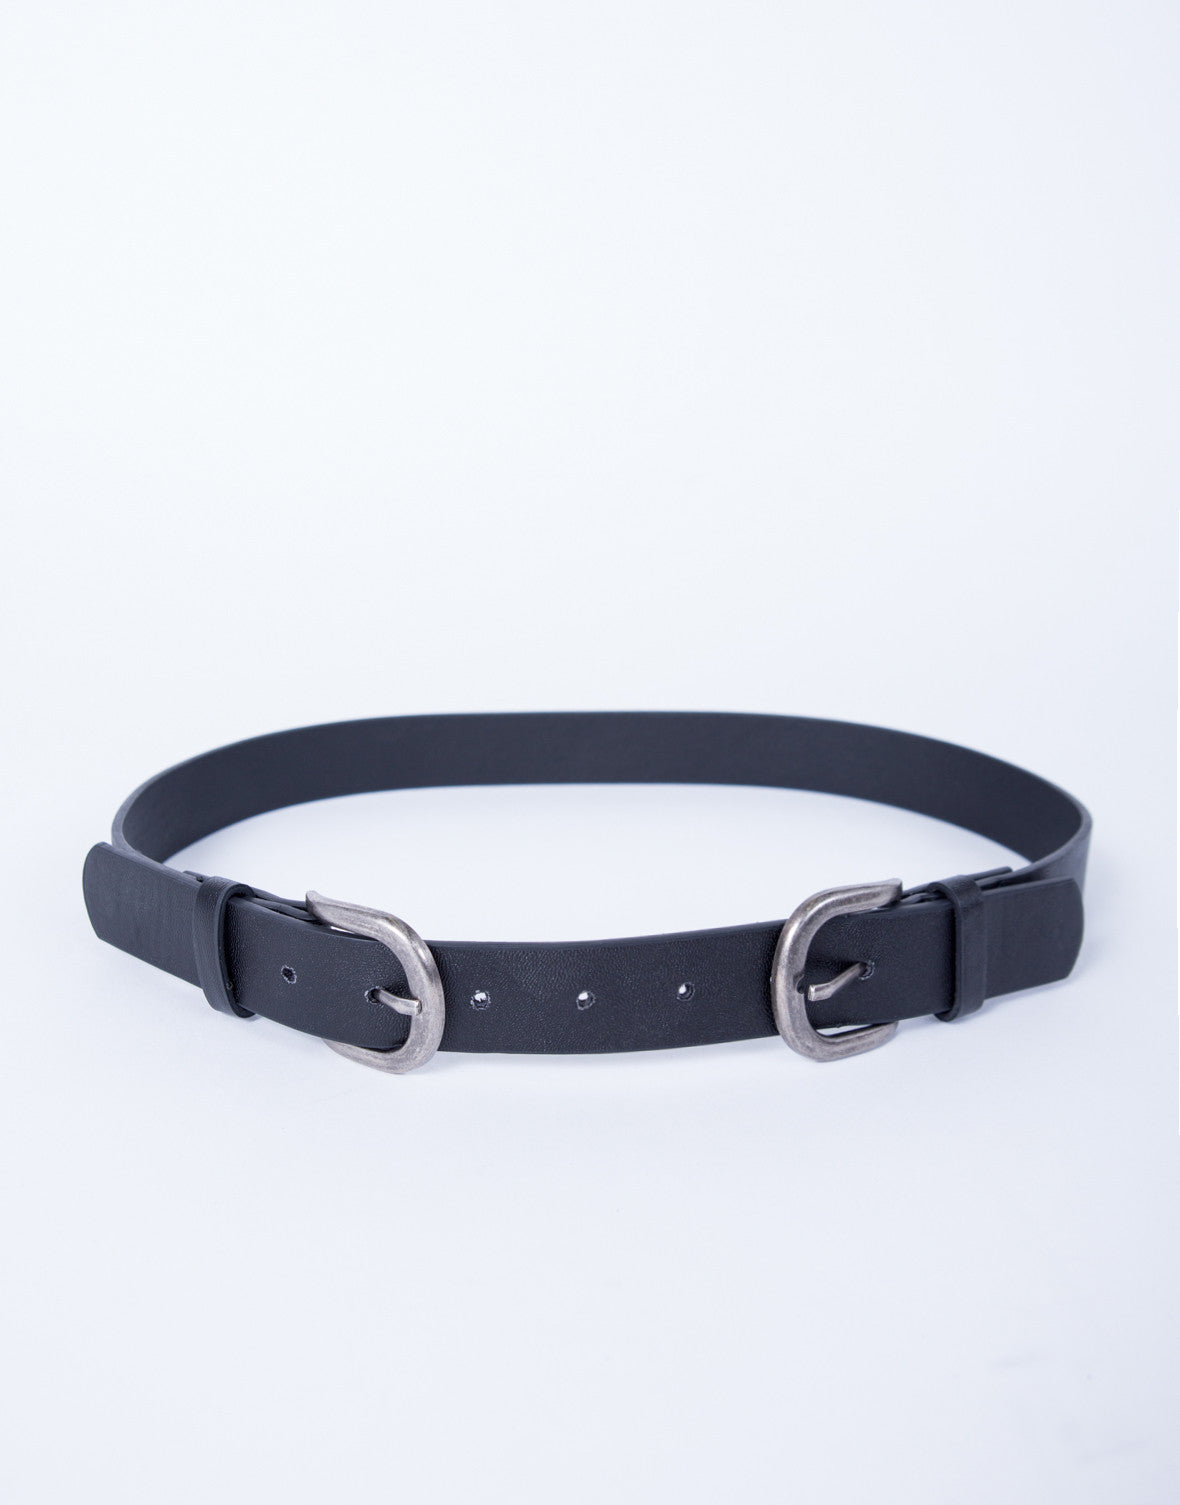 All Buckled in Belt - Black Leather Belt - Double Buckled Thin Belt ...